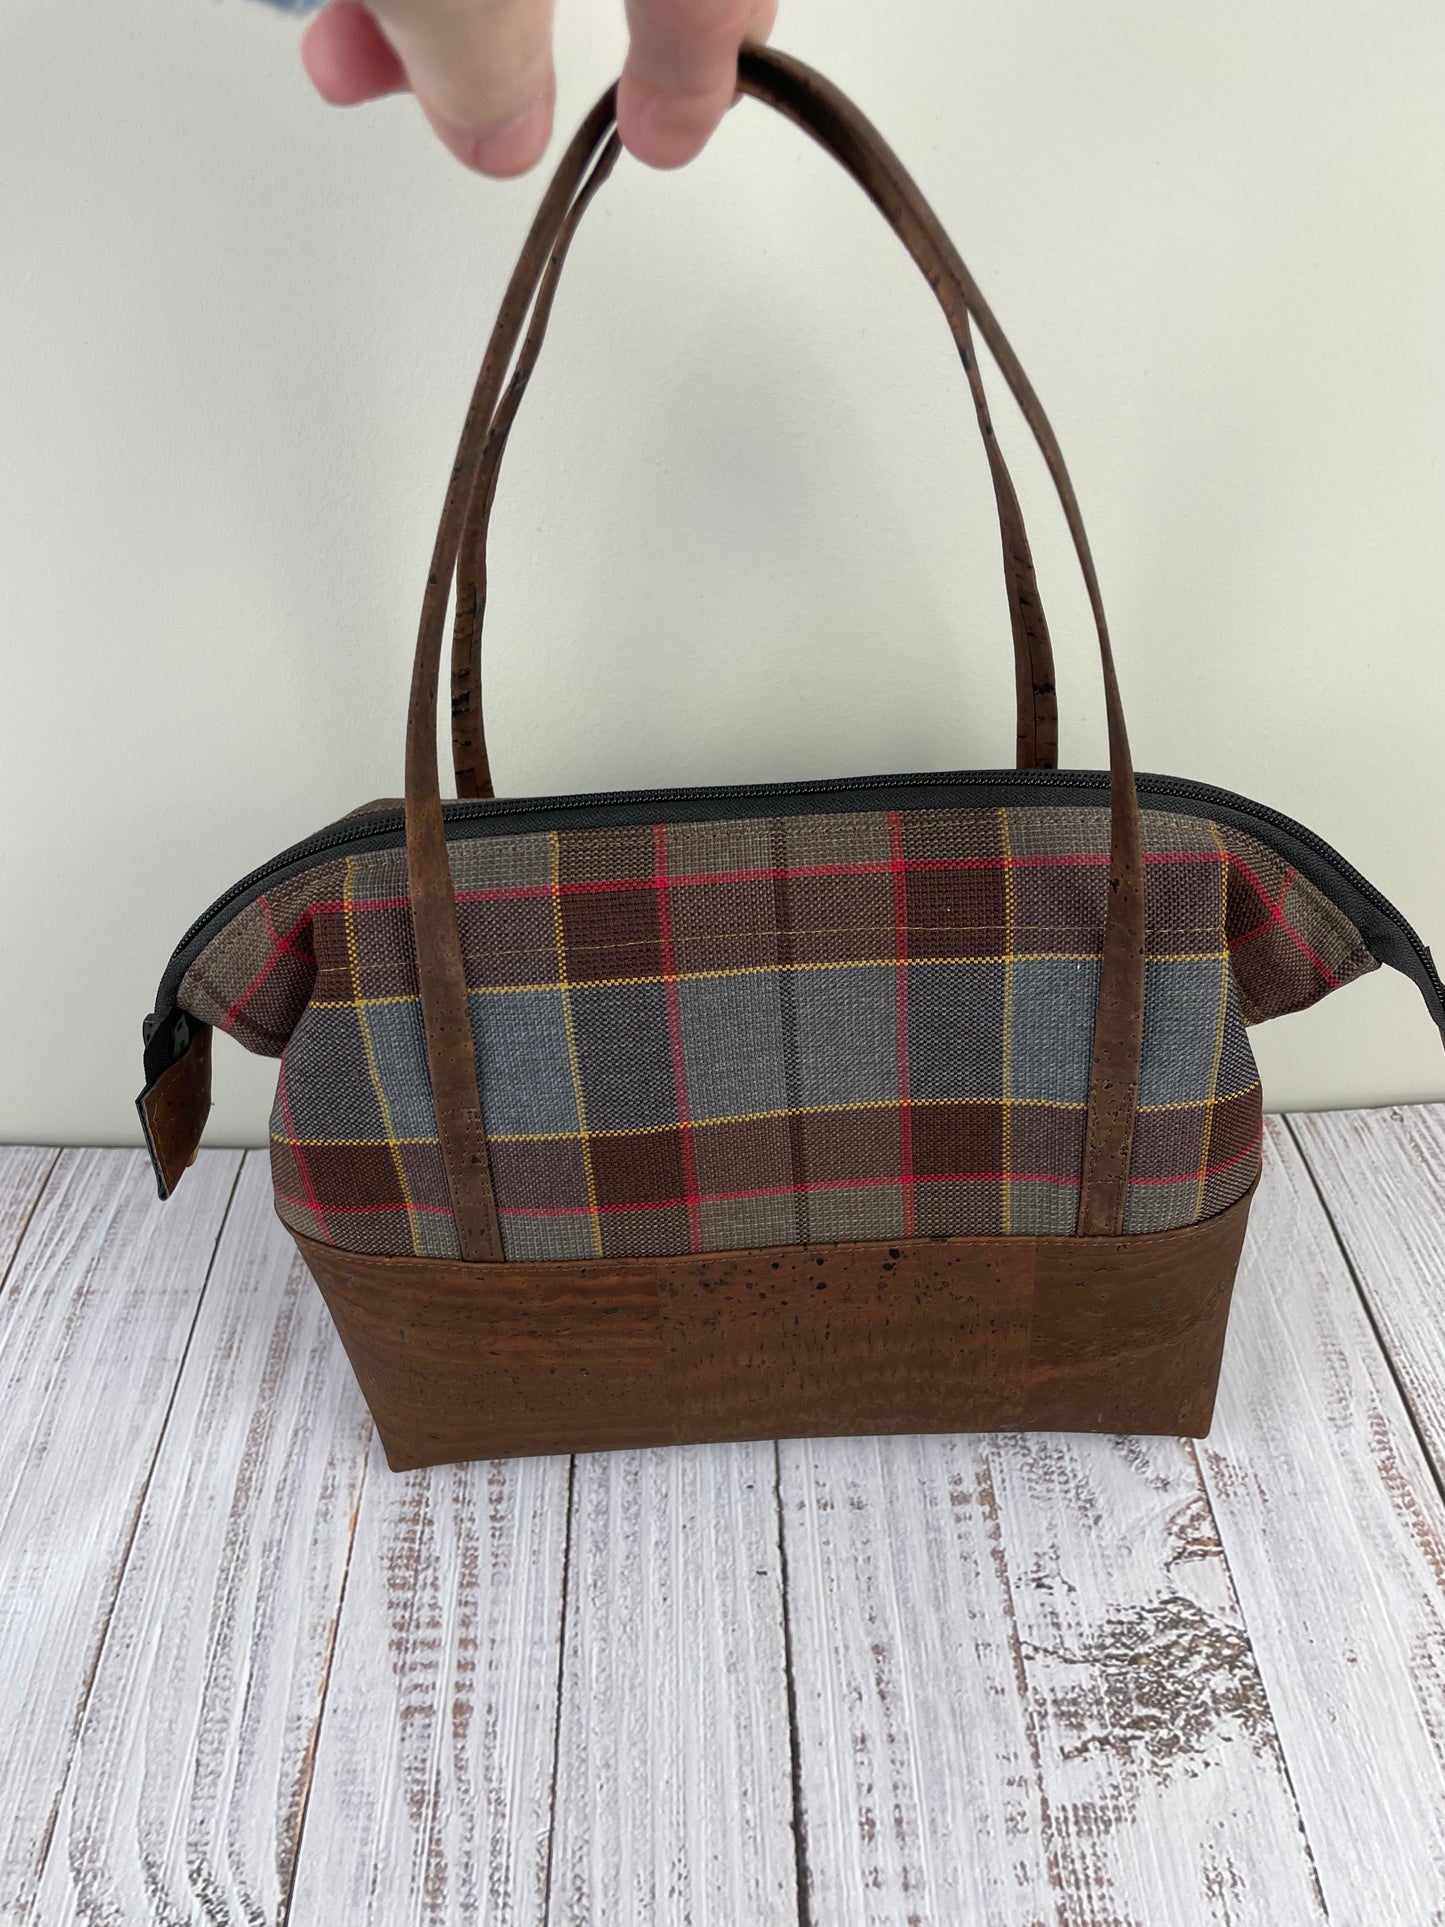 OFFICIAL FRASER TARTAN (OUTLANDER)  SMALL PLUS WIRE FRAME HANDBAG STYLE BAG FEATURING BROWN CORK  BOTTOM AND HANDLES